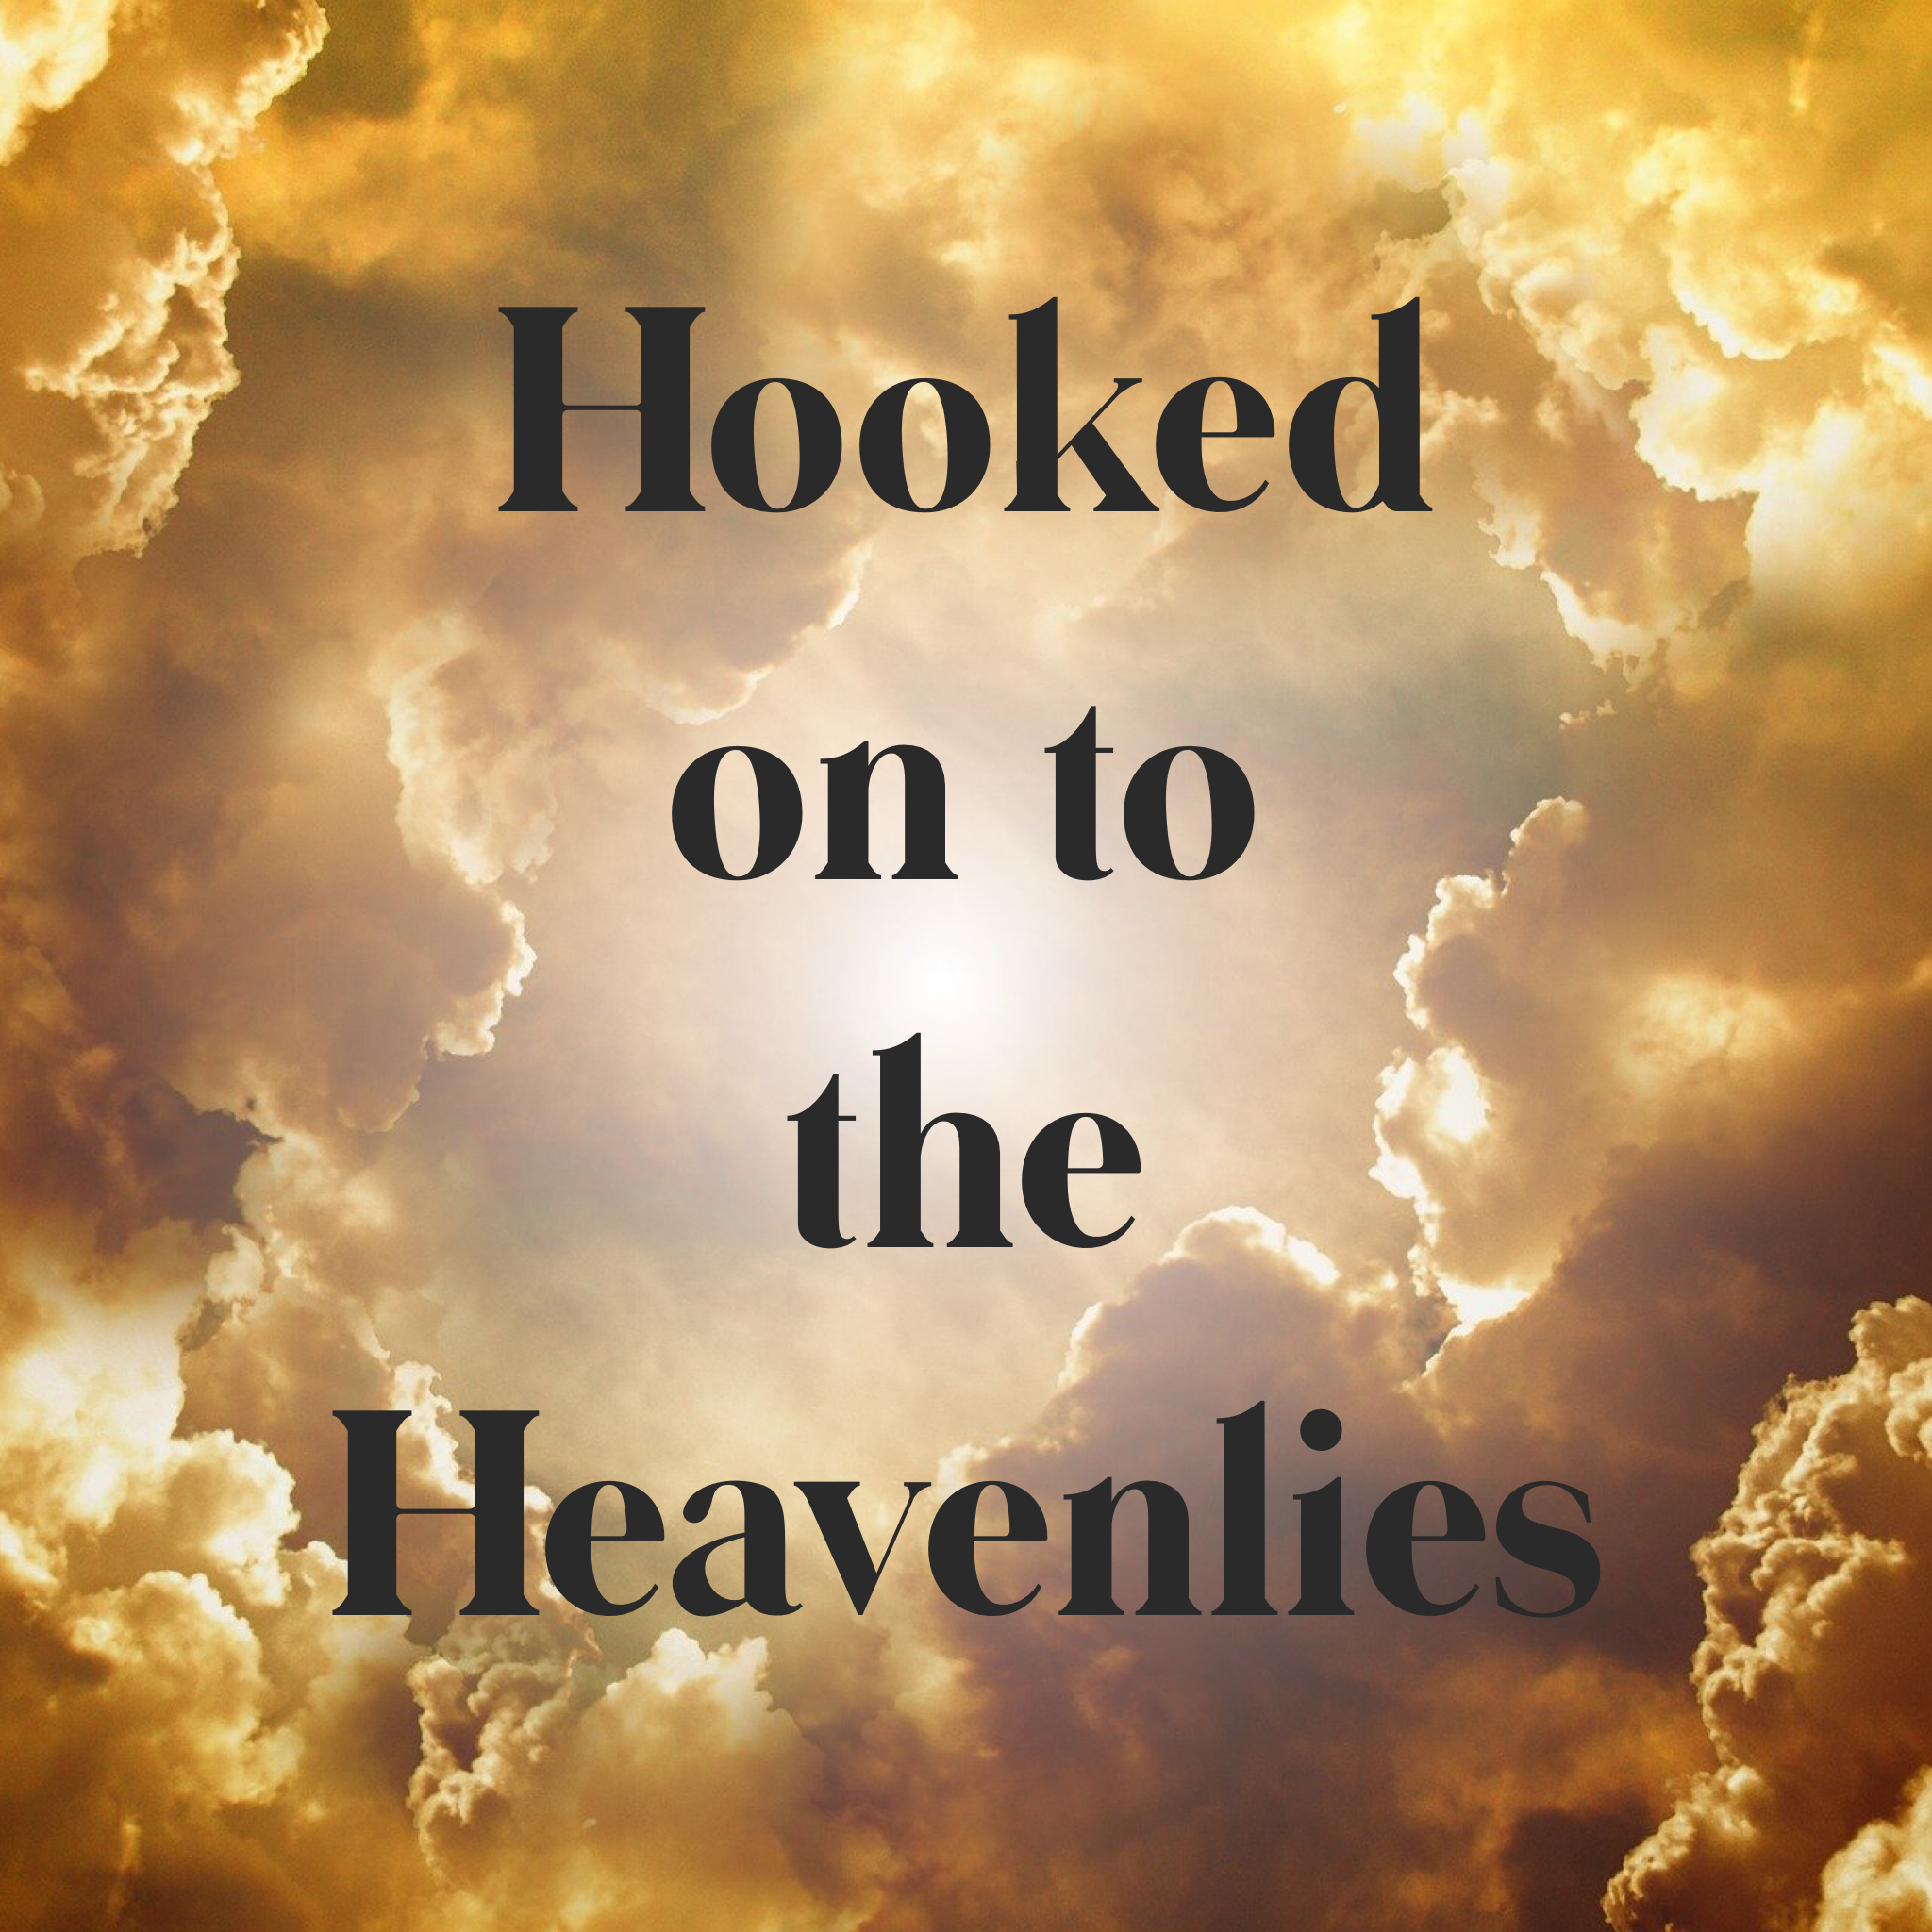 Hooked on to the Heavenlies - 10/16/20